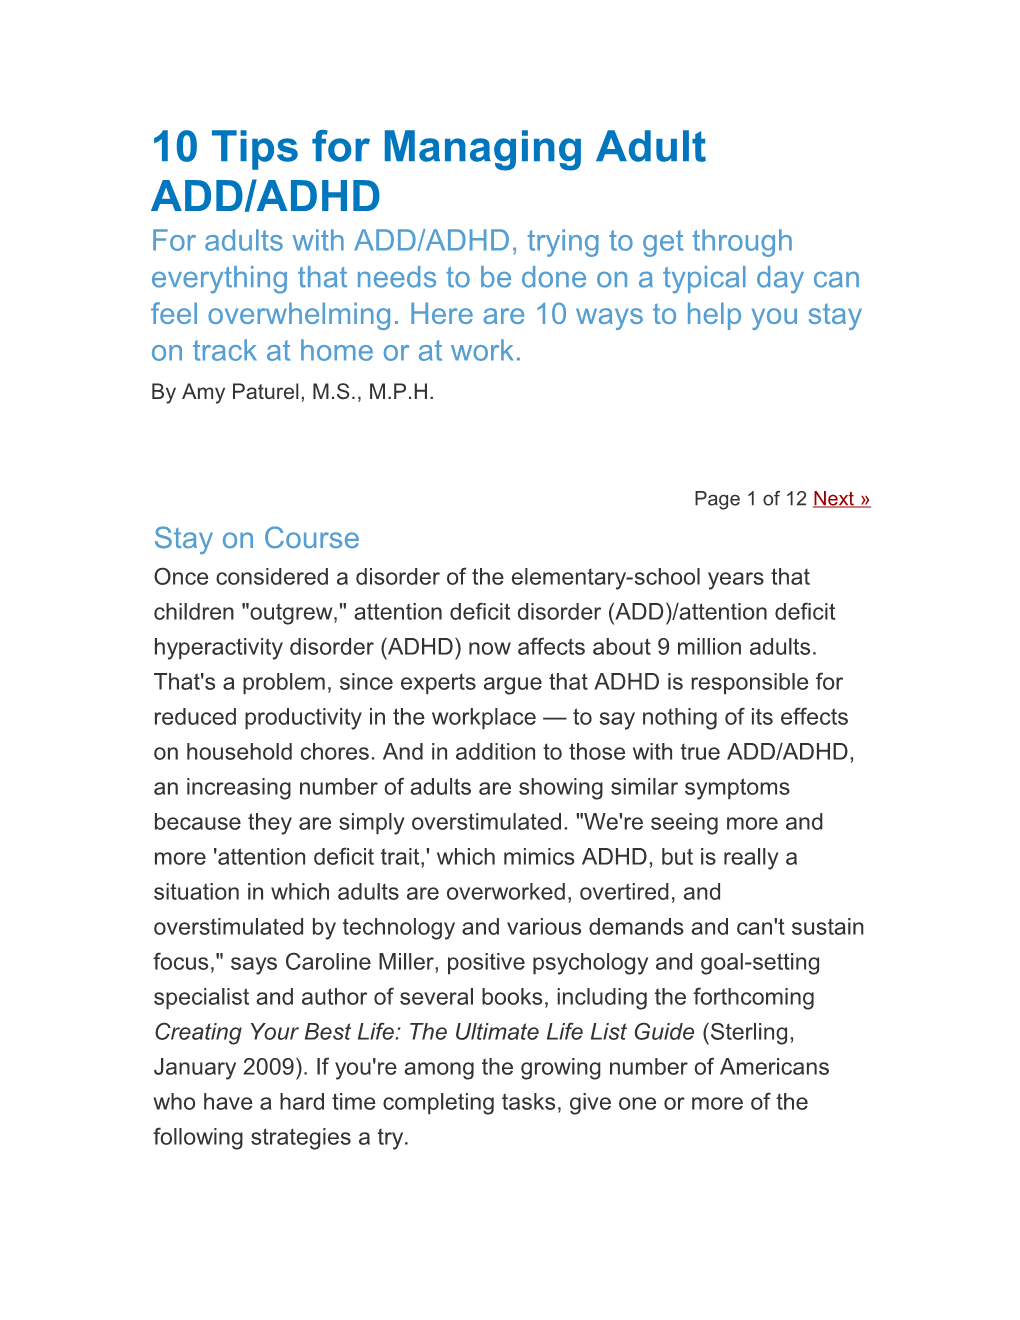 10 Tips for Managing Adult ADD/ADHD